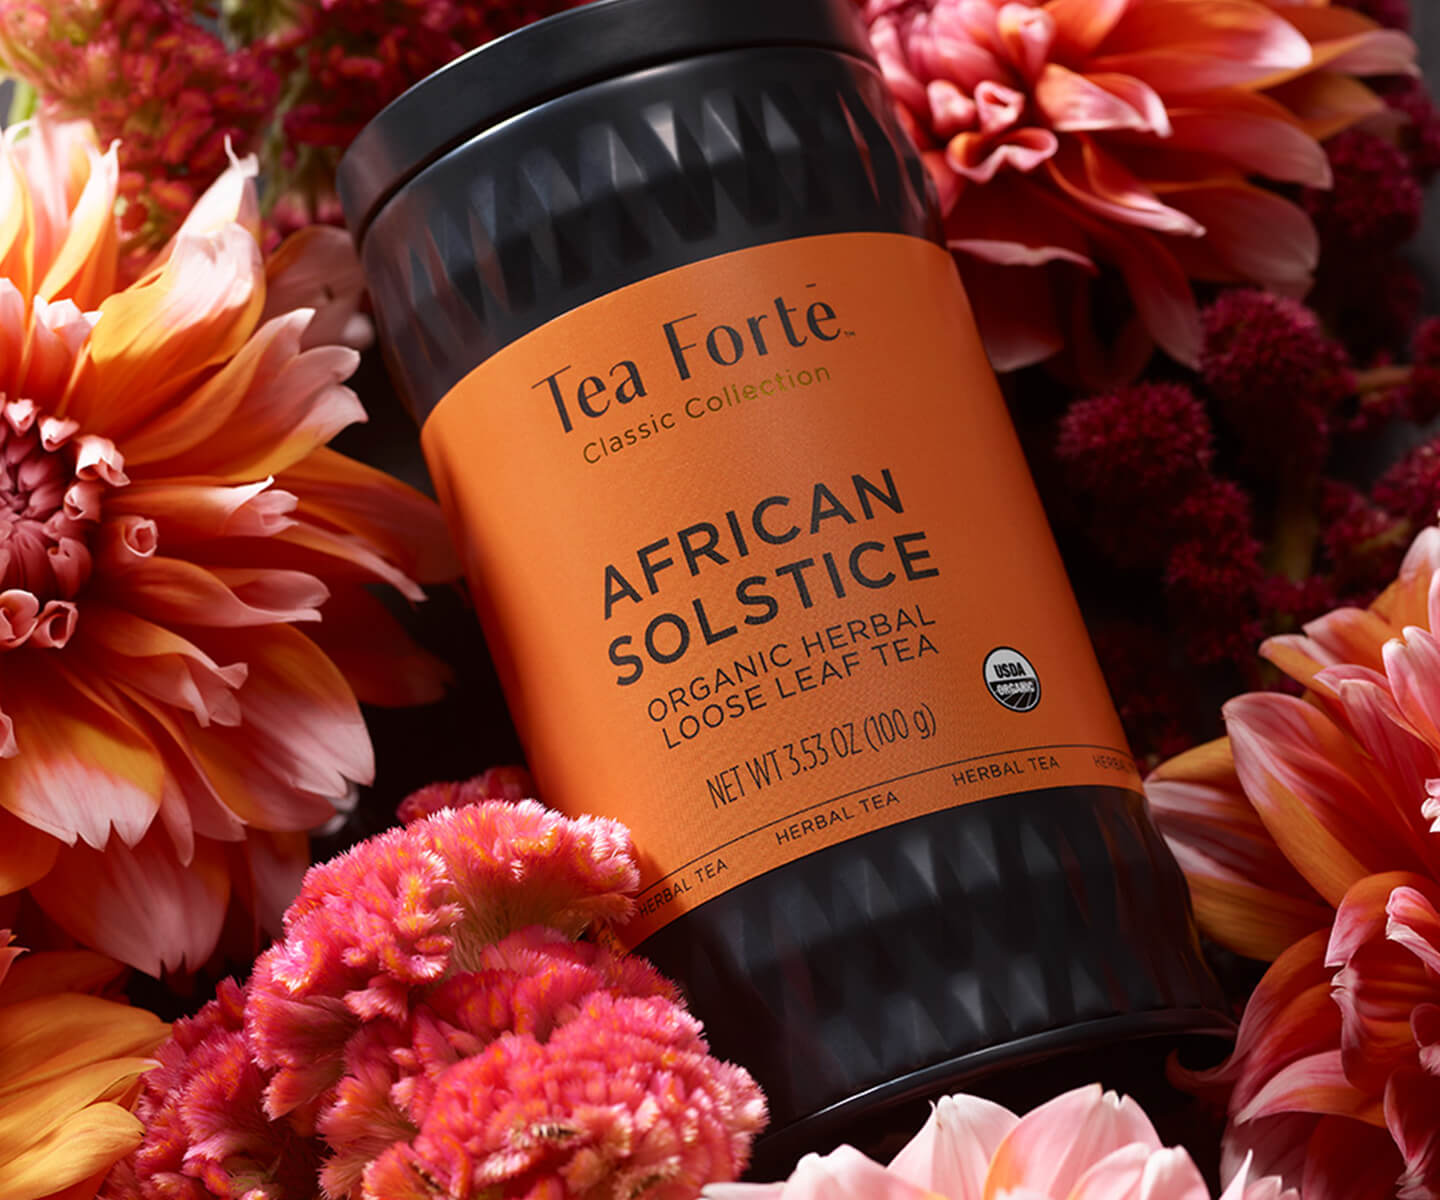 African Solstice Loose Tea Canister on a bed of flowers